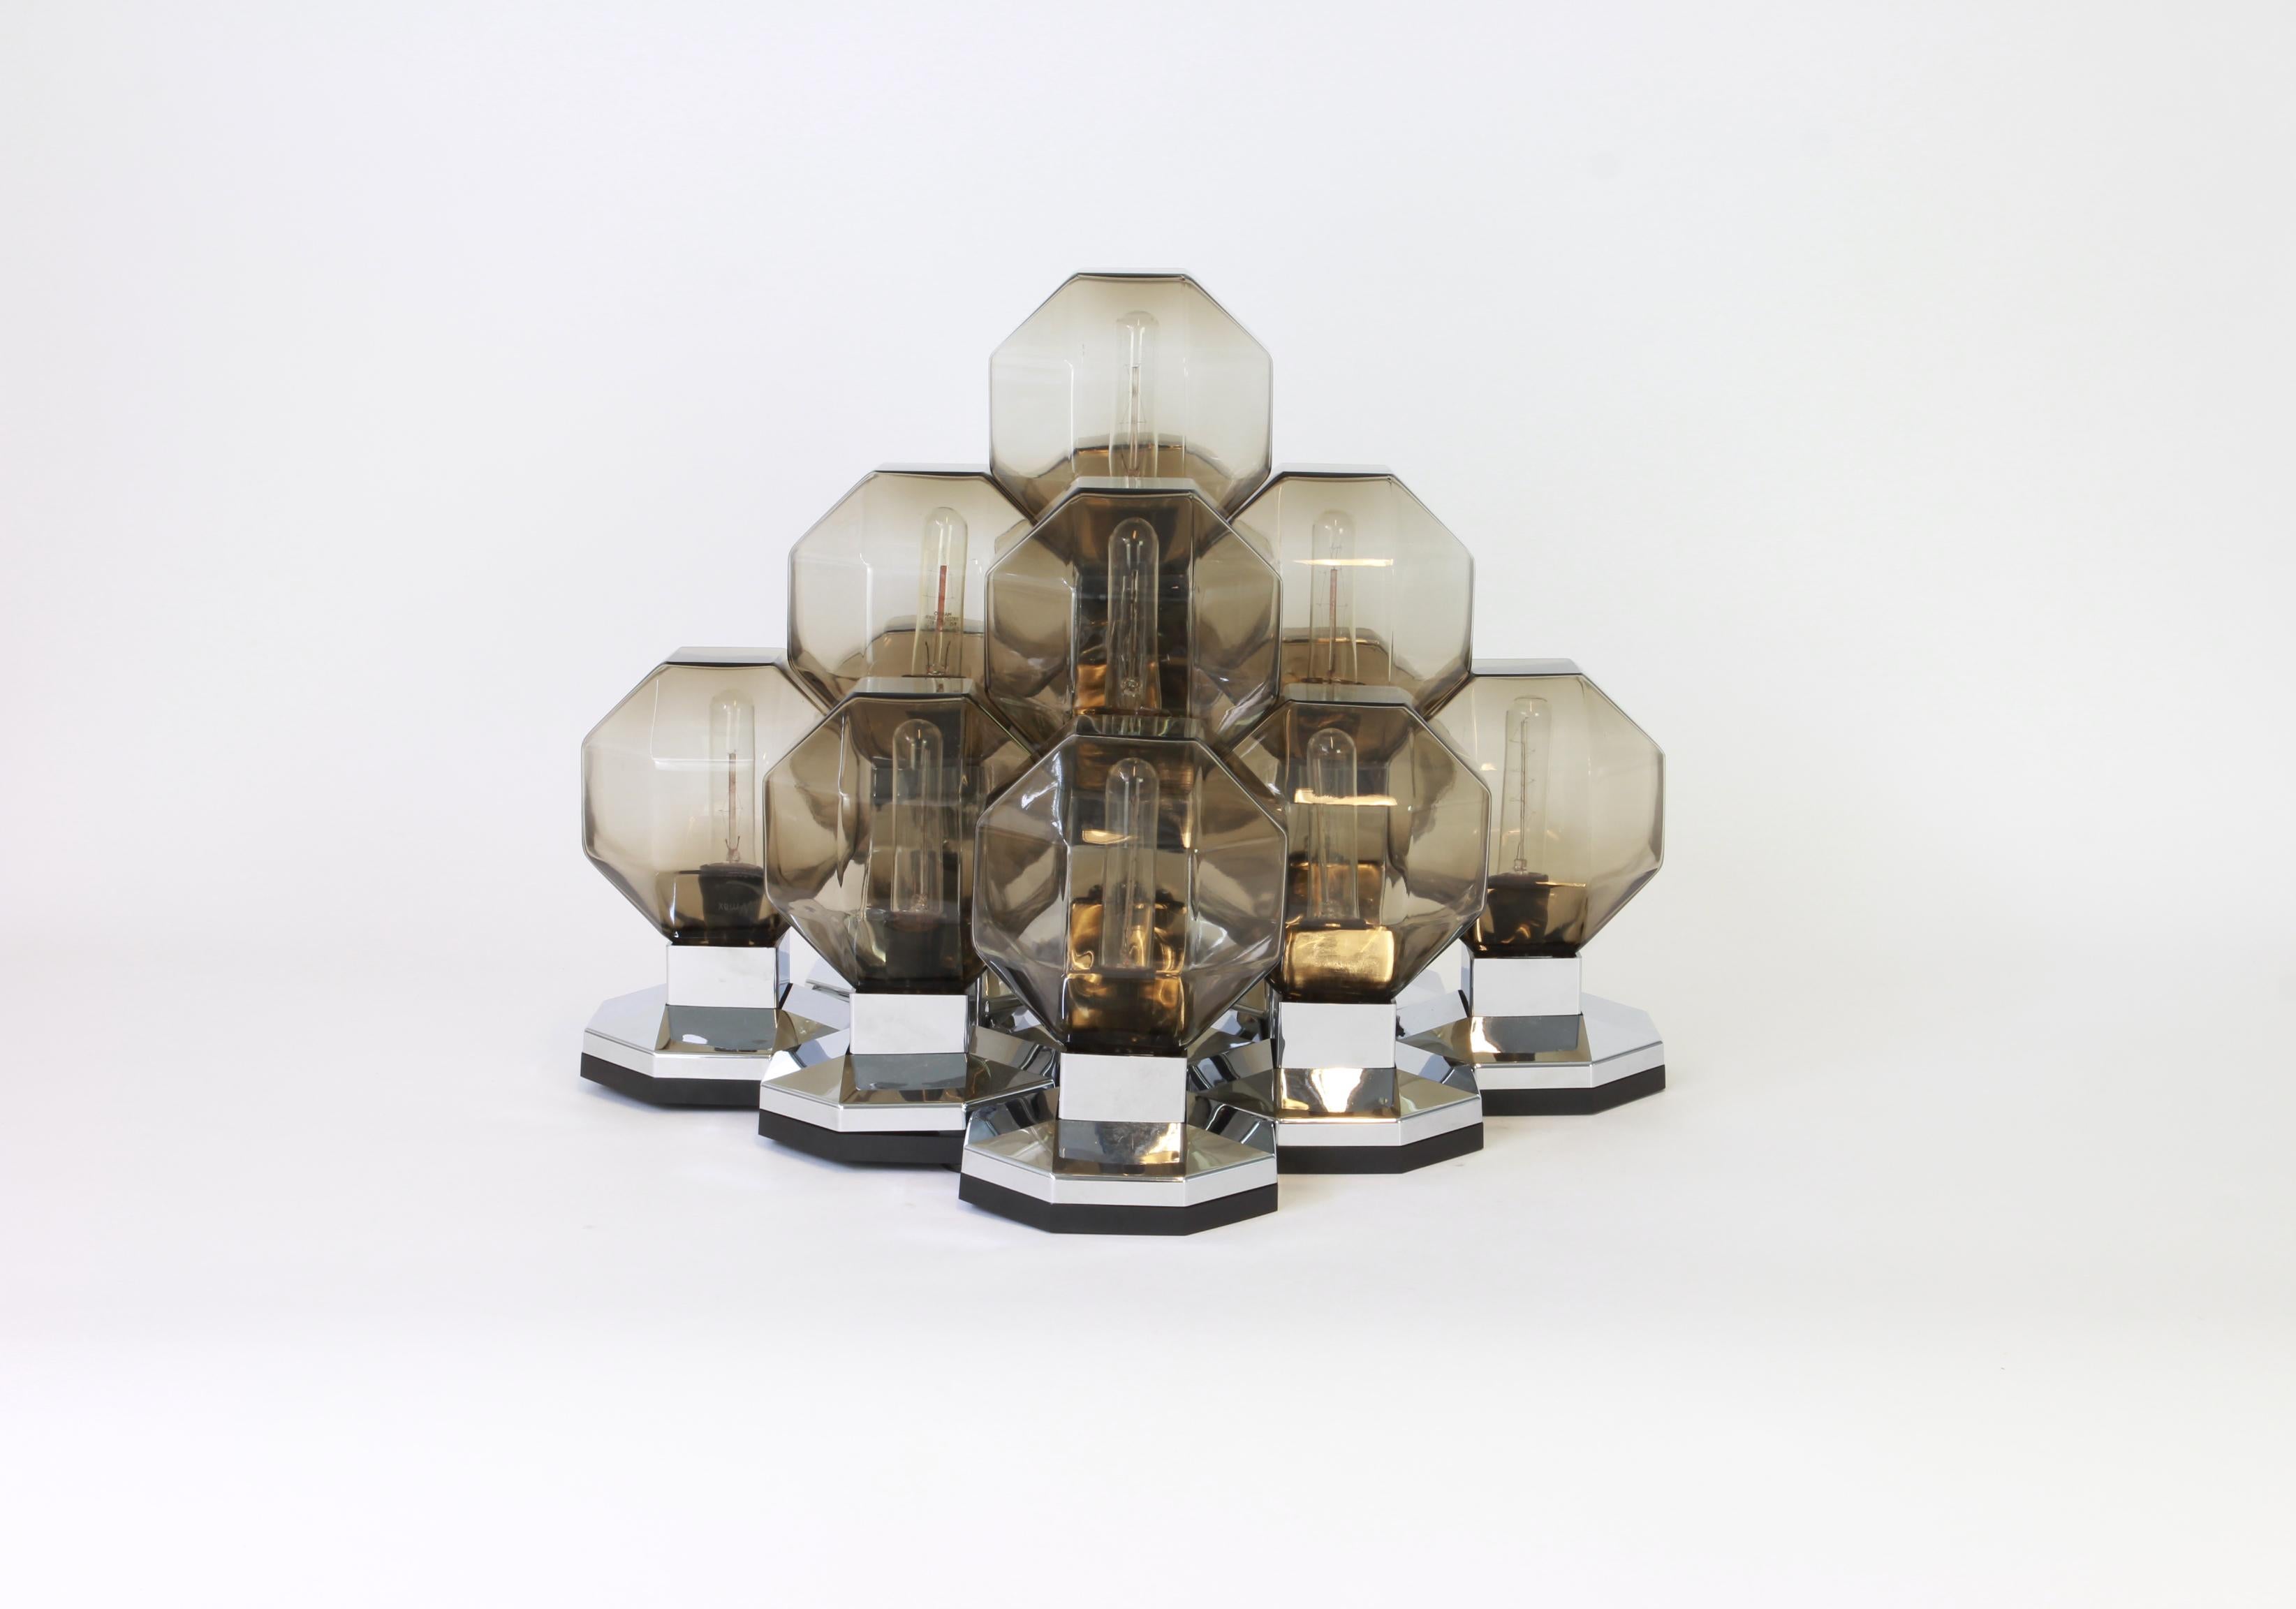 Stunning Space Age large modular flushmount by Designer: Motoko Ishii for staff, Germany, 1970s
Wonderful design with 13 smoked glasses on a chrome color frame.
This can be used as a ceiling, wall or table lampe.

High quality and in very good